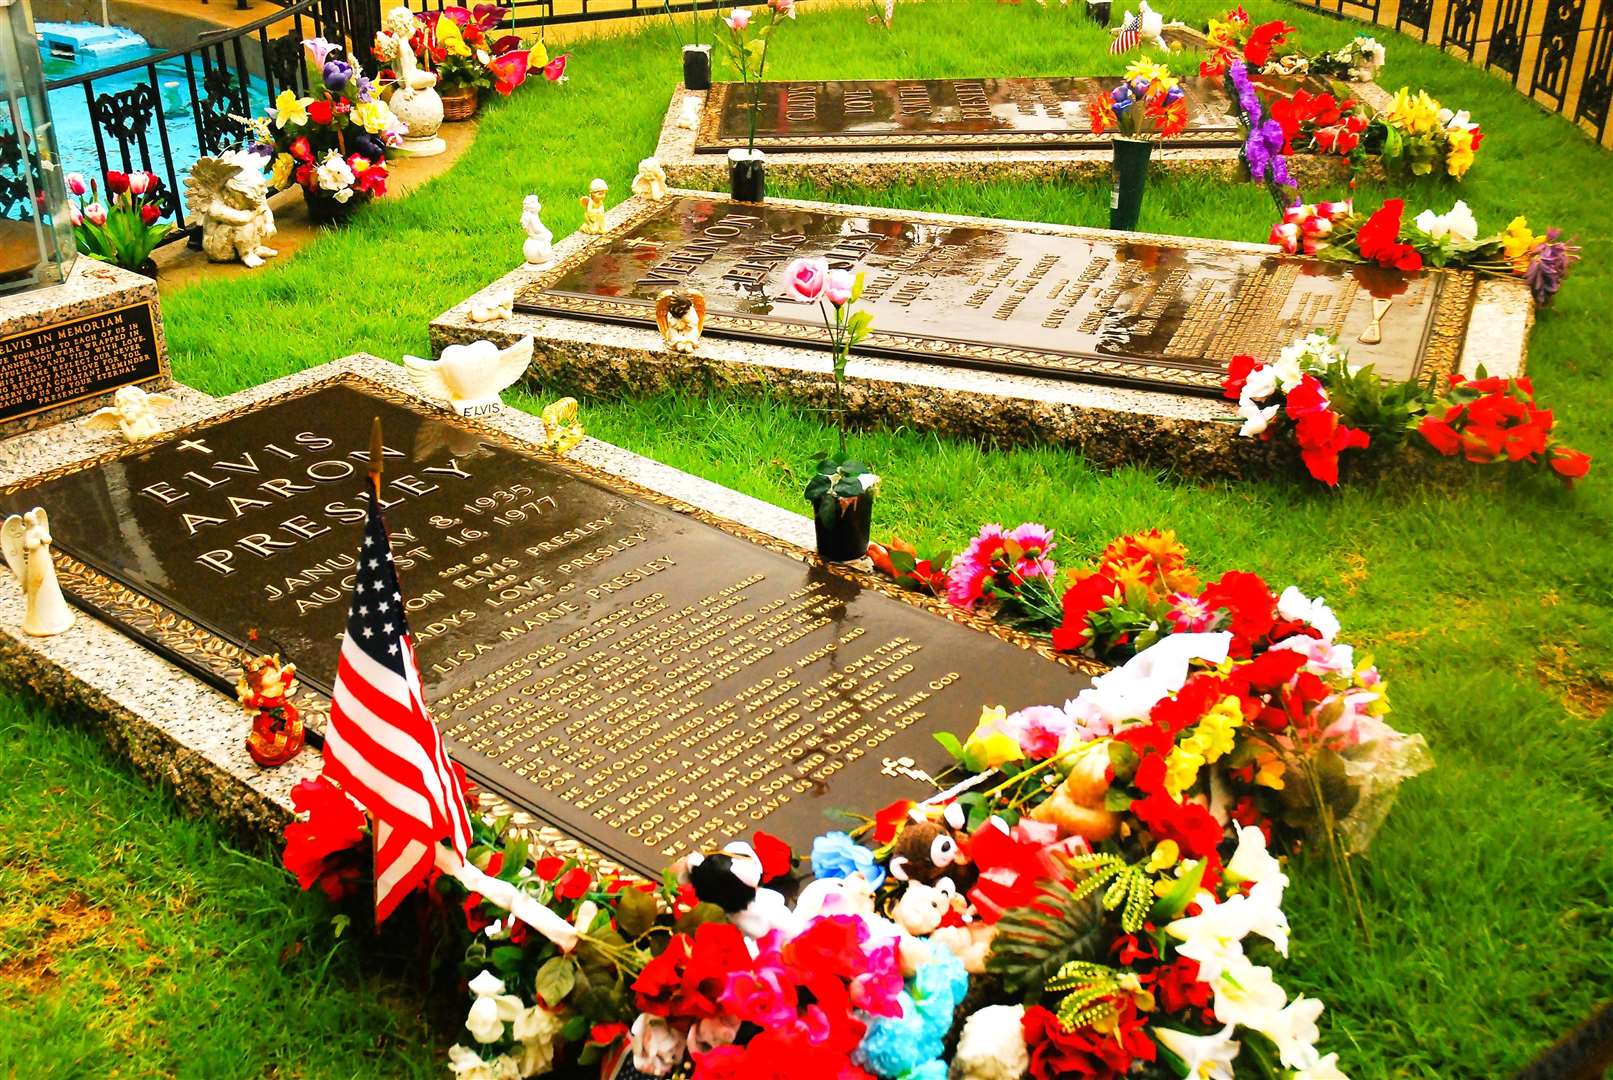 The final resting place for Elvis Presley at Graceland, Memphis. Picture: AdobeStock